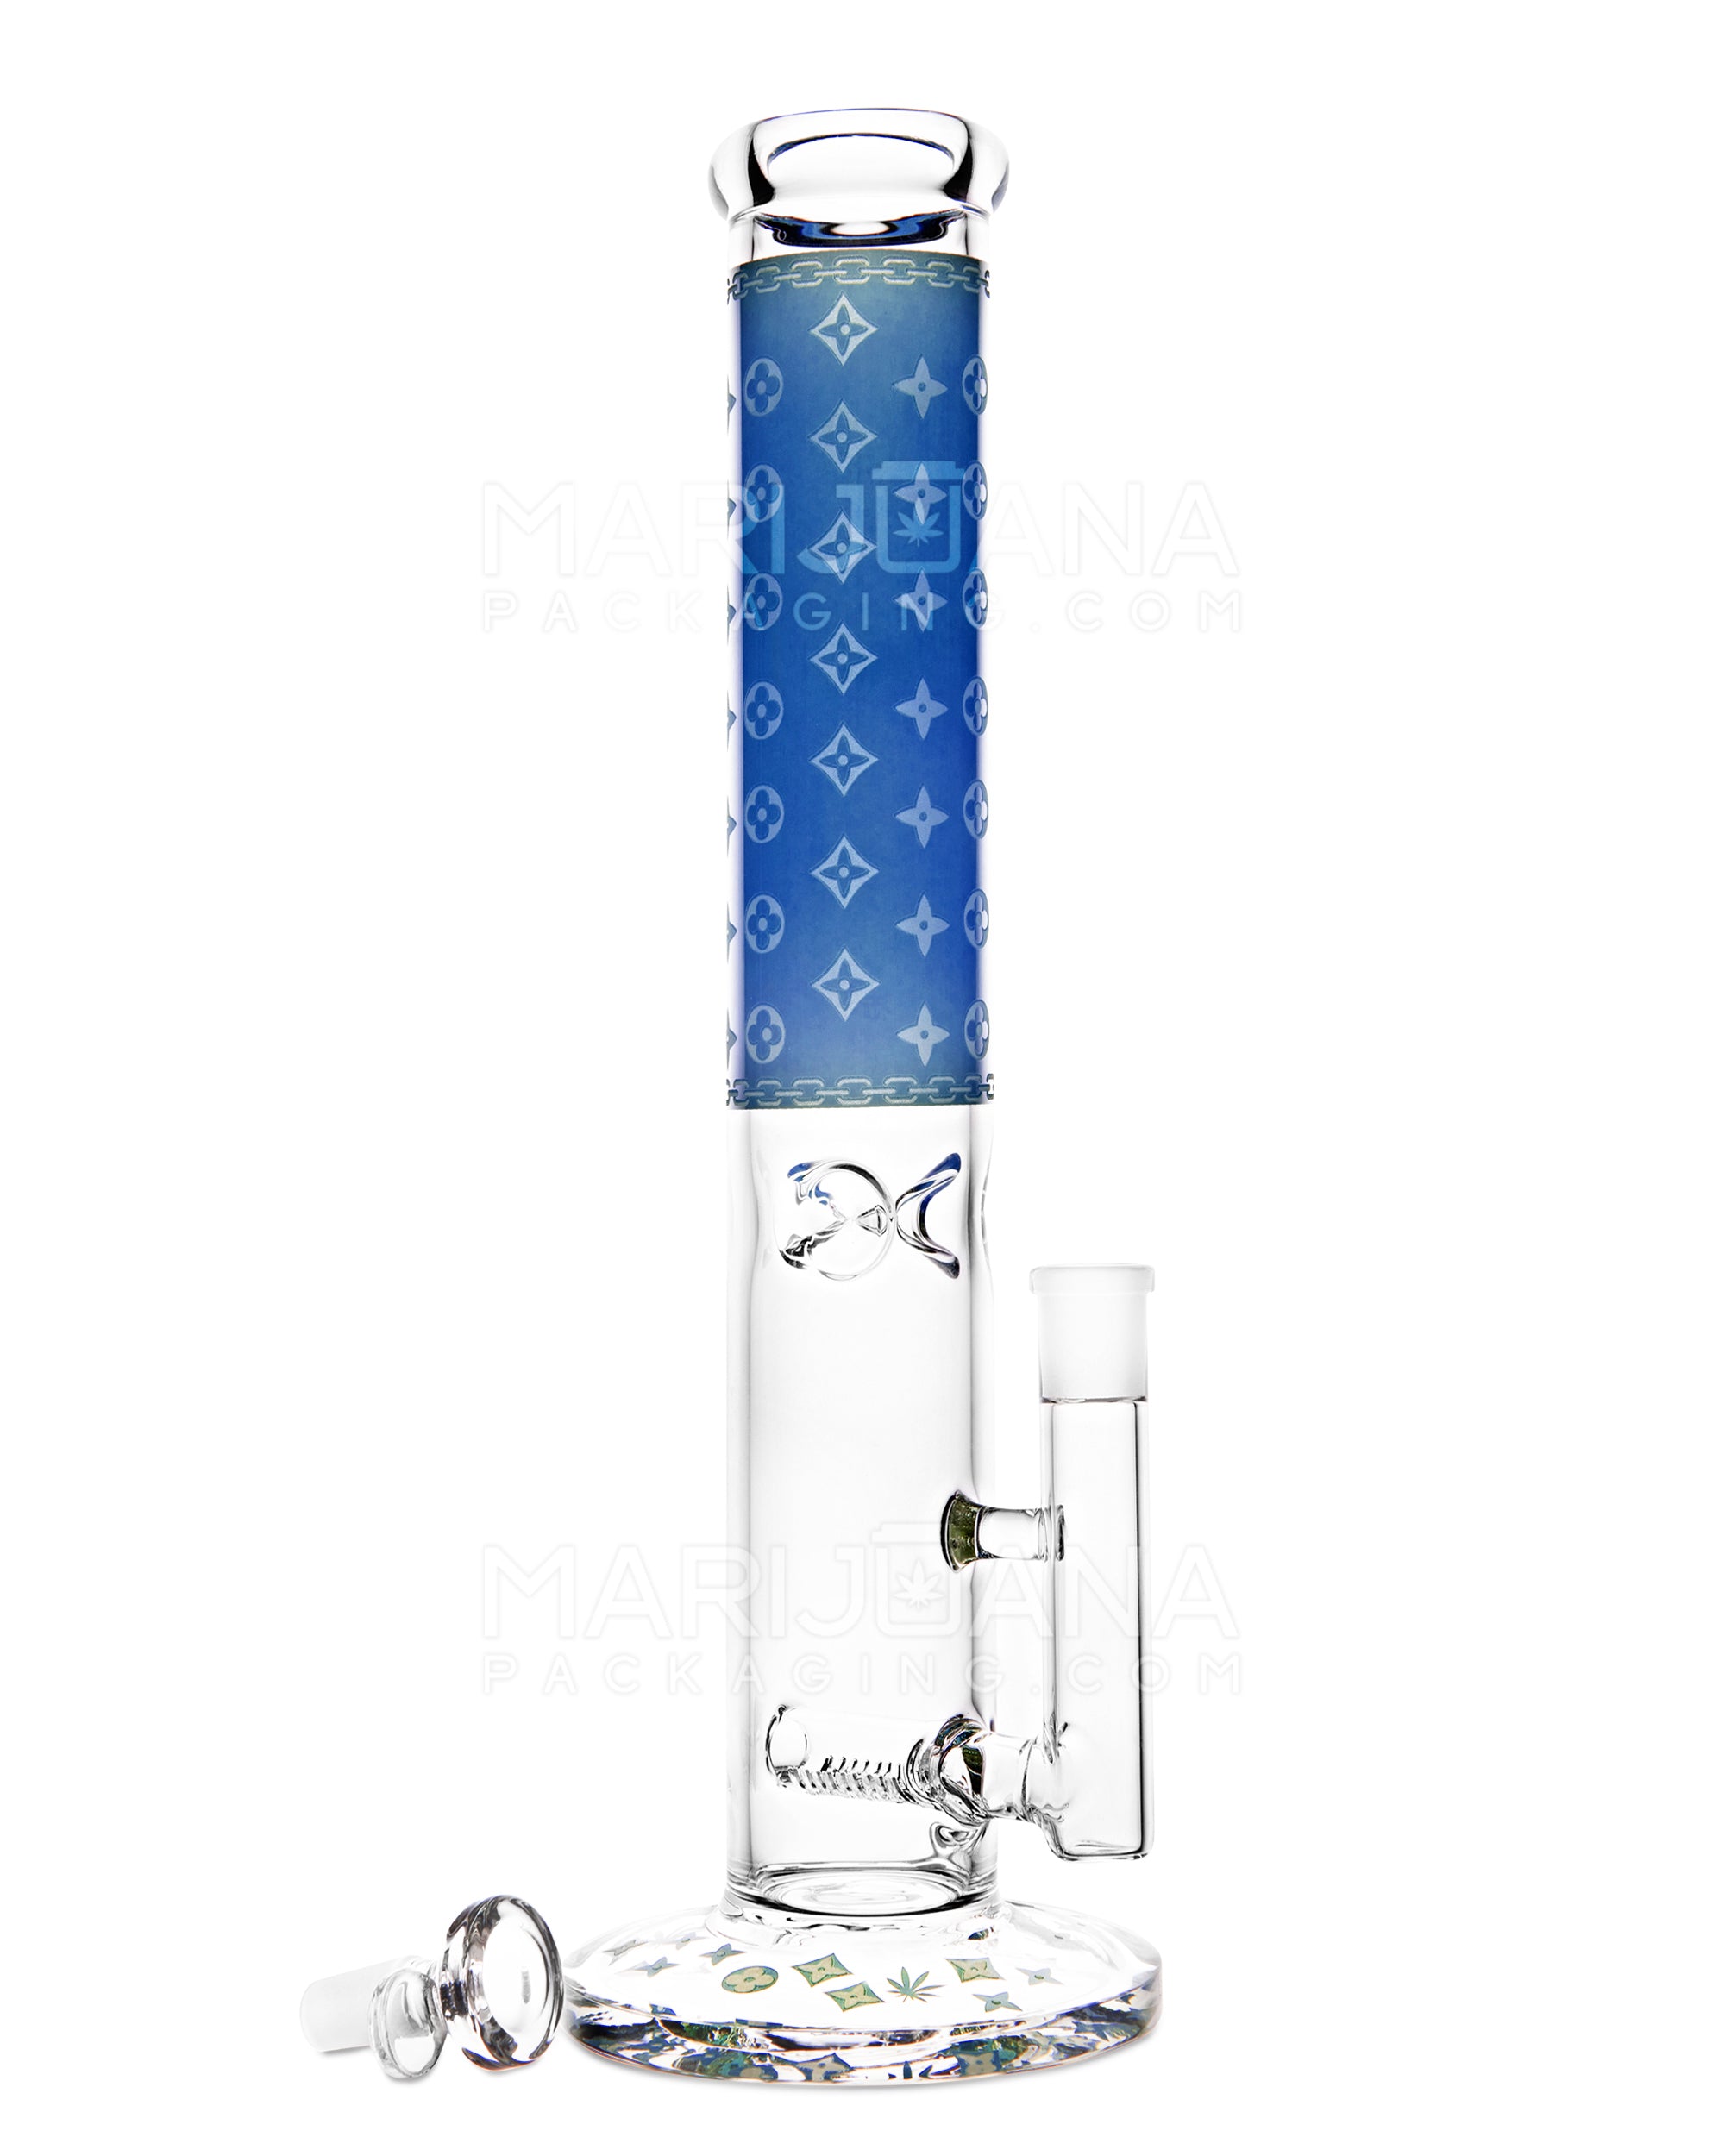 Straight Neck Luxury Design Inline Perc Glass Water Pipe w/ Ice Catcher | 14in Tall - 14mm Bowl - Blue - 6